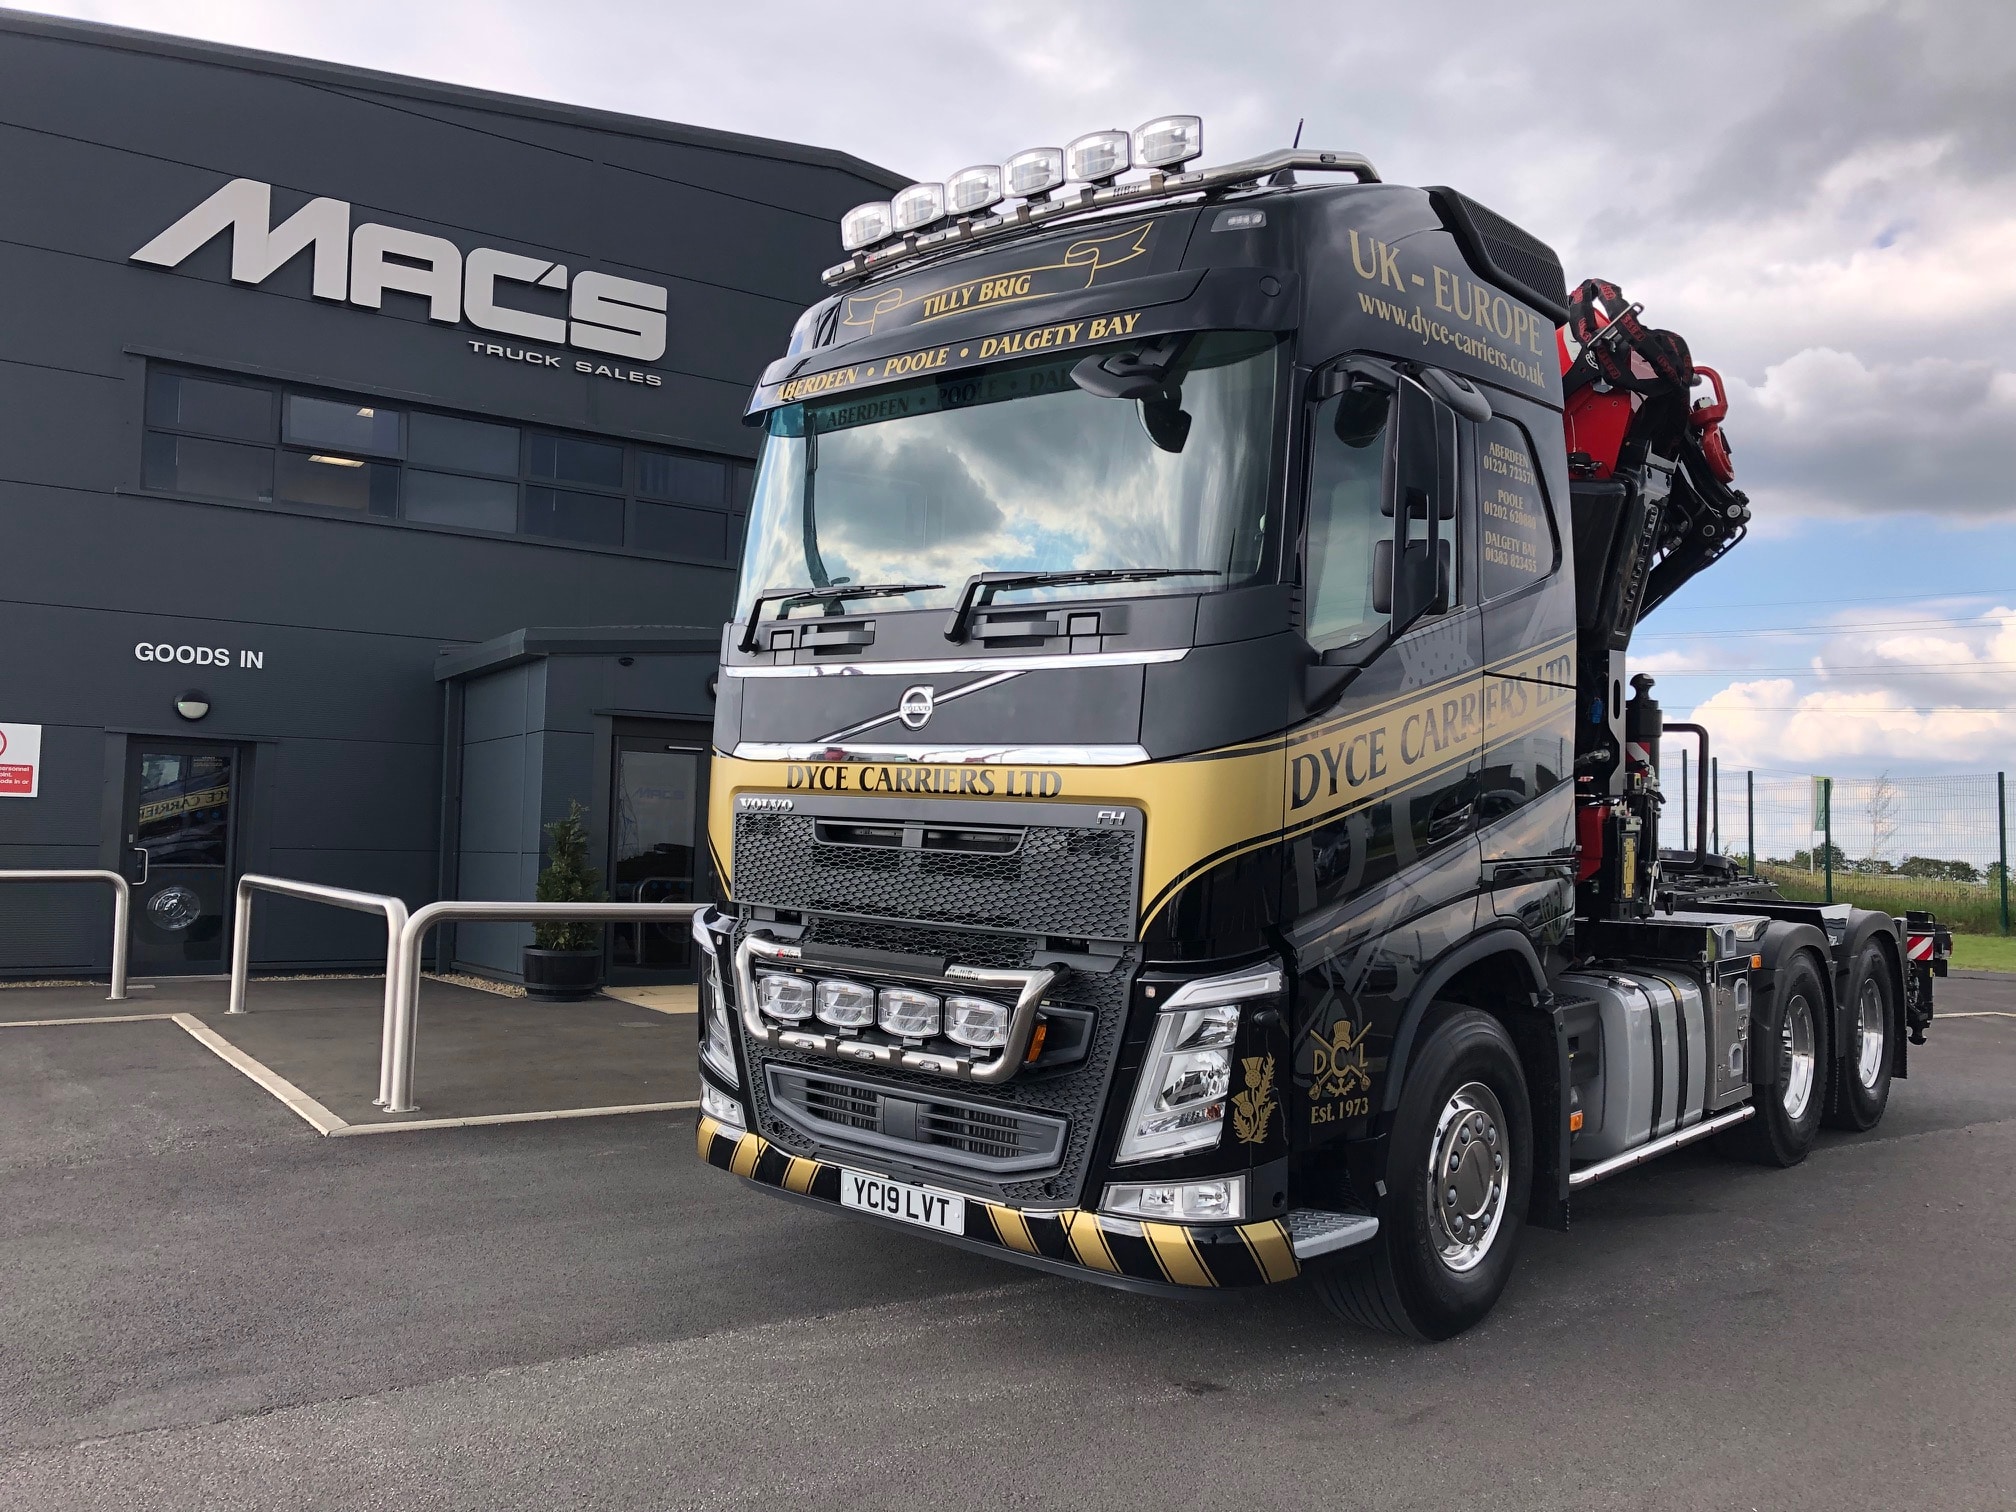 Dyce Carriers – Back for More!